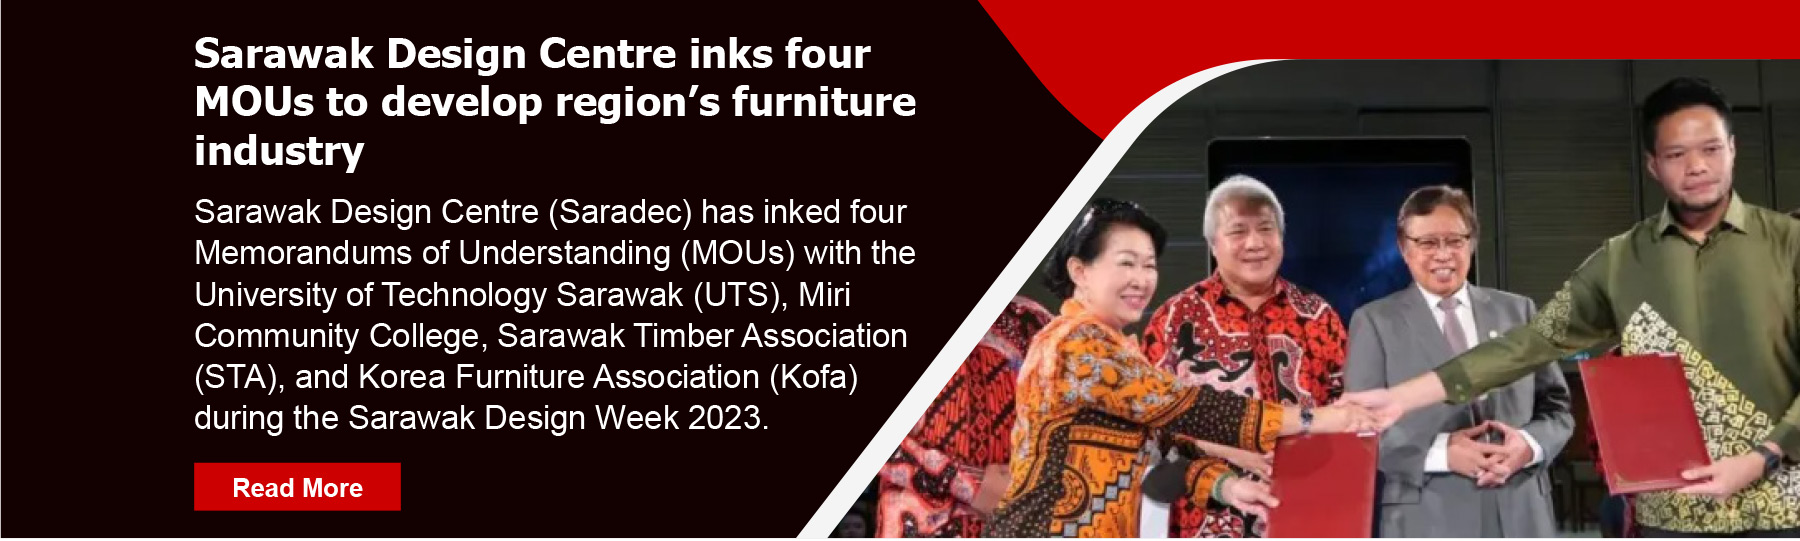 Sarawak Design Centre inks four MOUs to develop region’s furniture industry